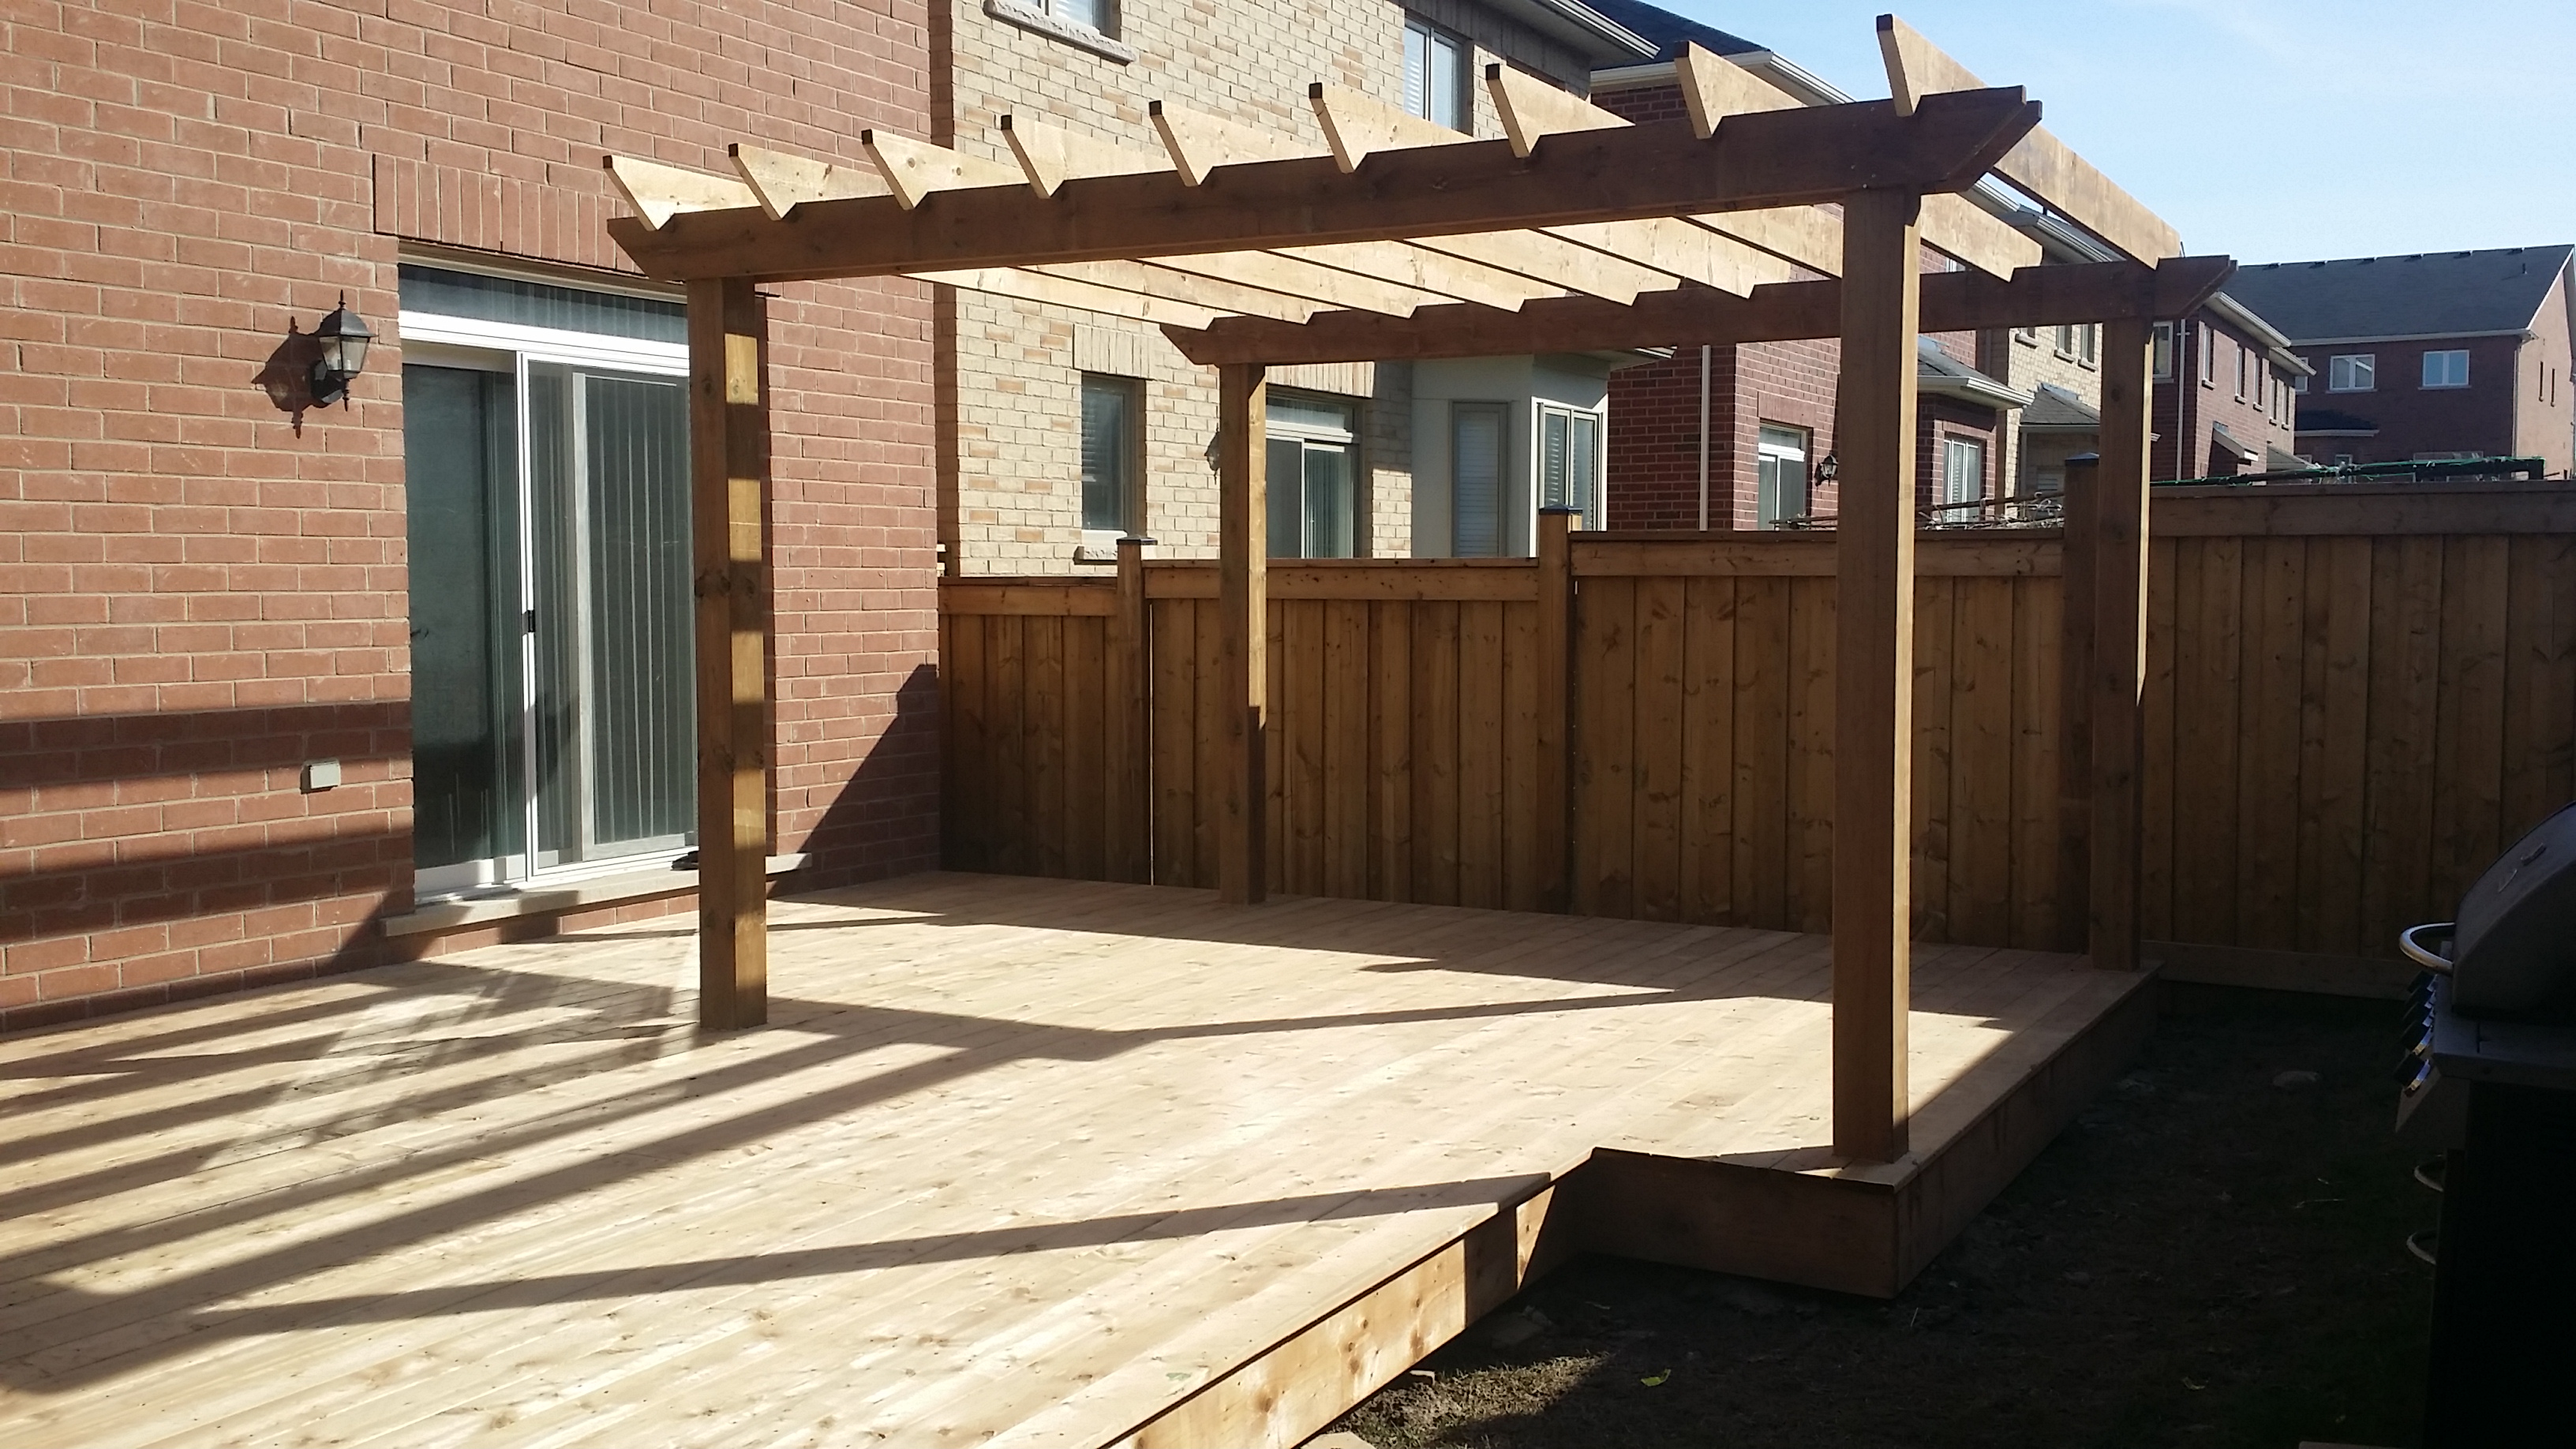 At Keinzen we build high quality patios. Decks, fences, sheds, gazebos. Call us now at 416 429 4682 for a free estimate.